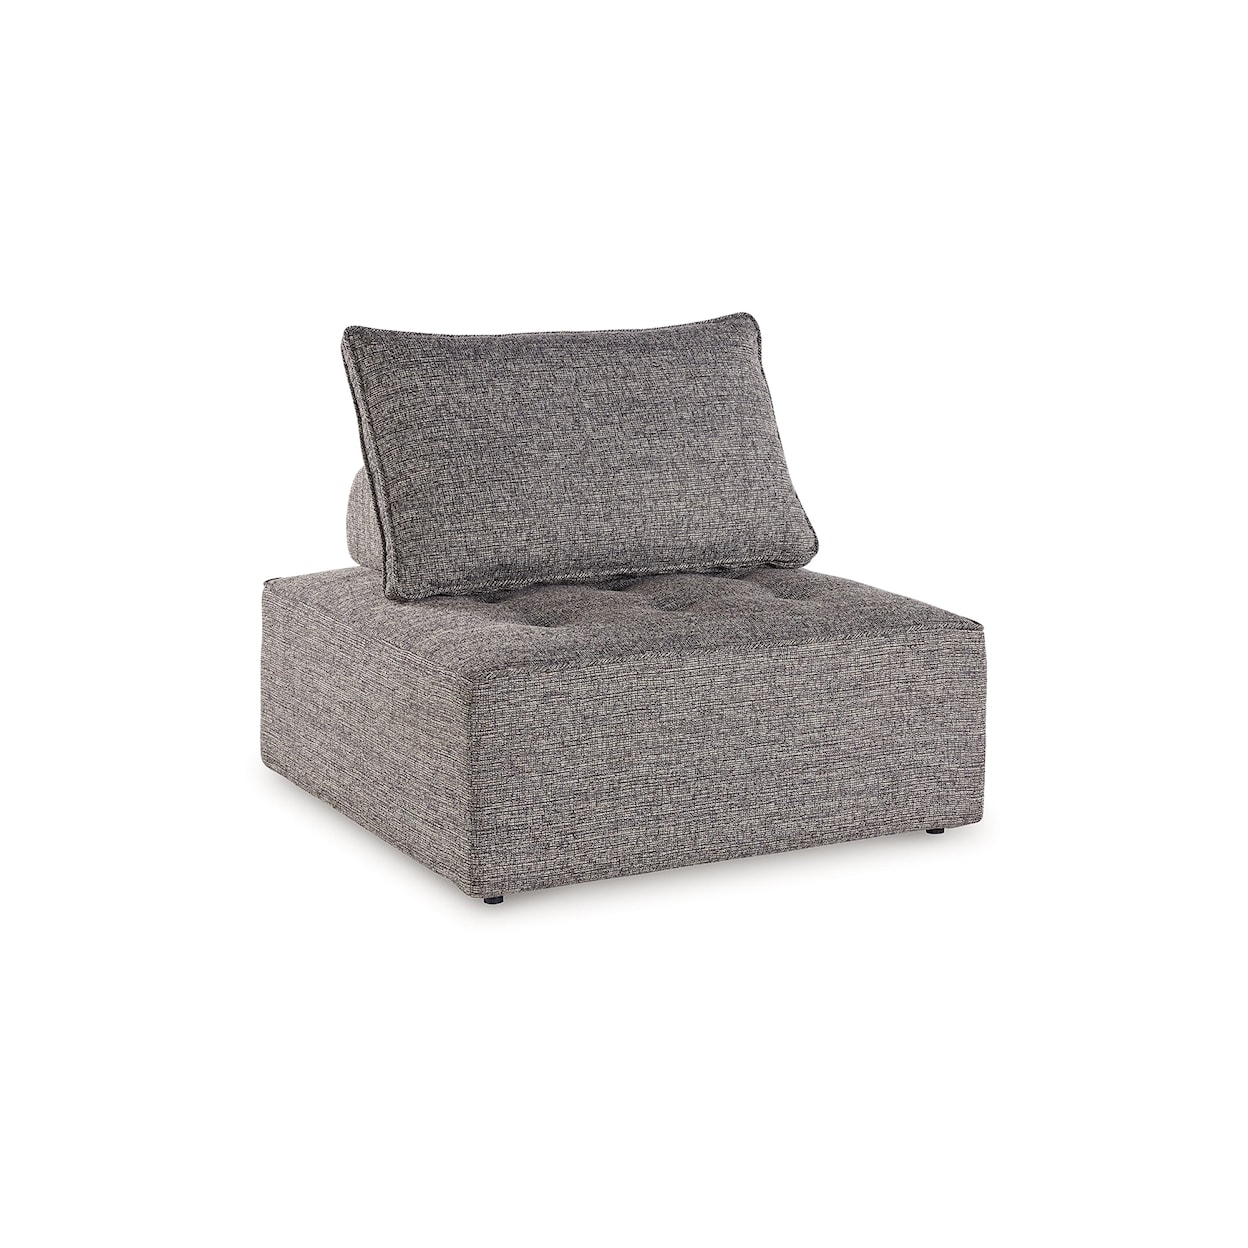 Benchcraft Bree Zee Outdoor Lounge Chair w/Cushion